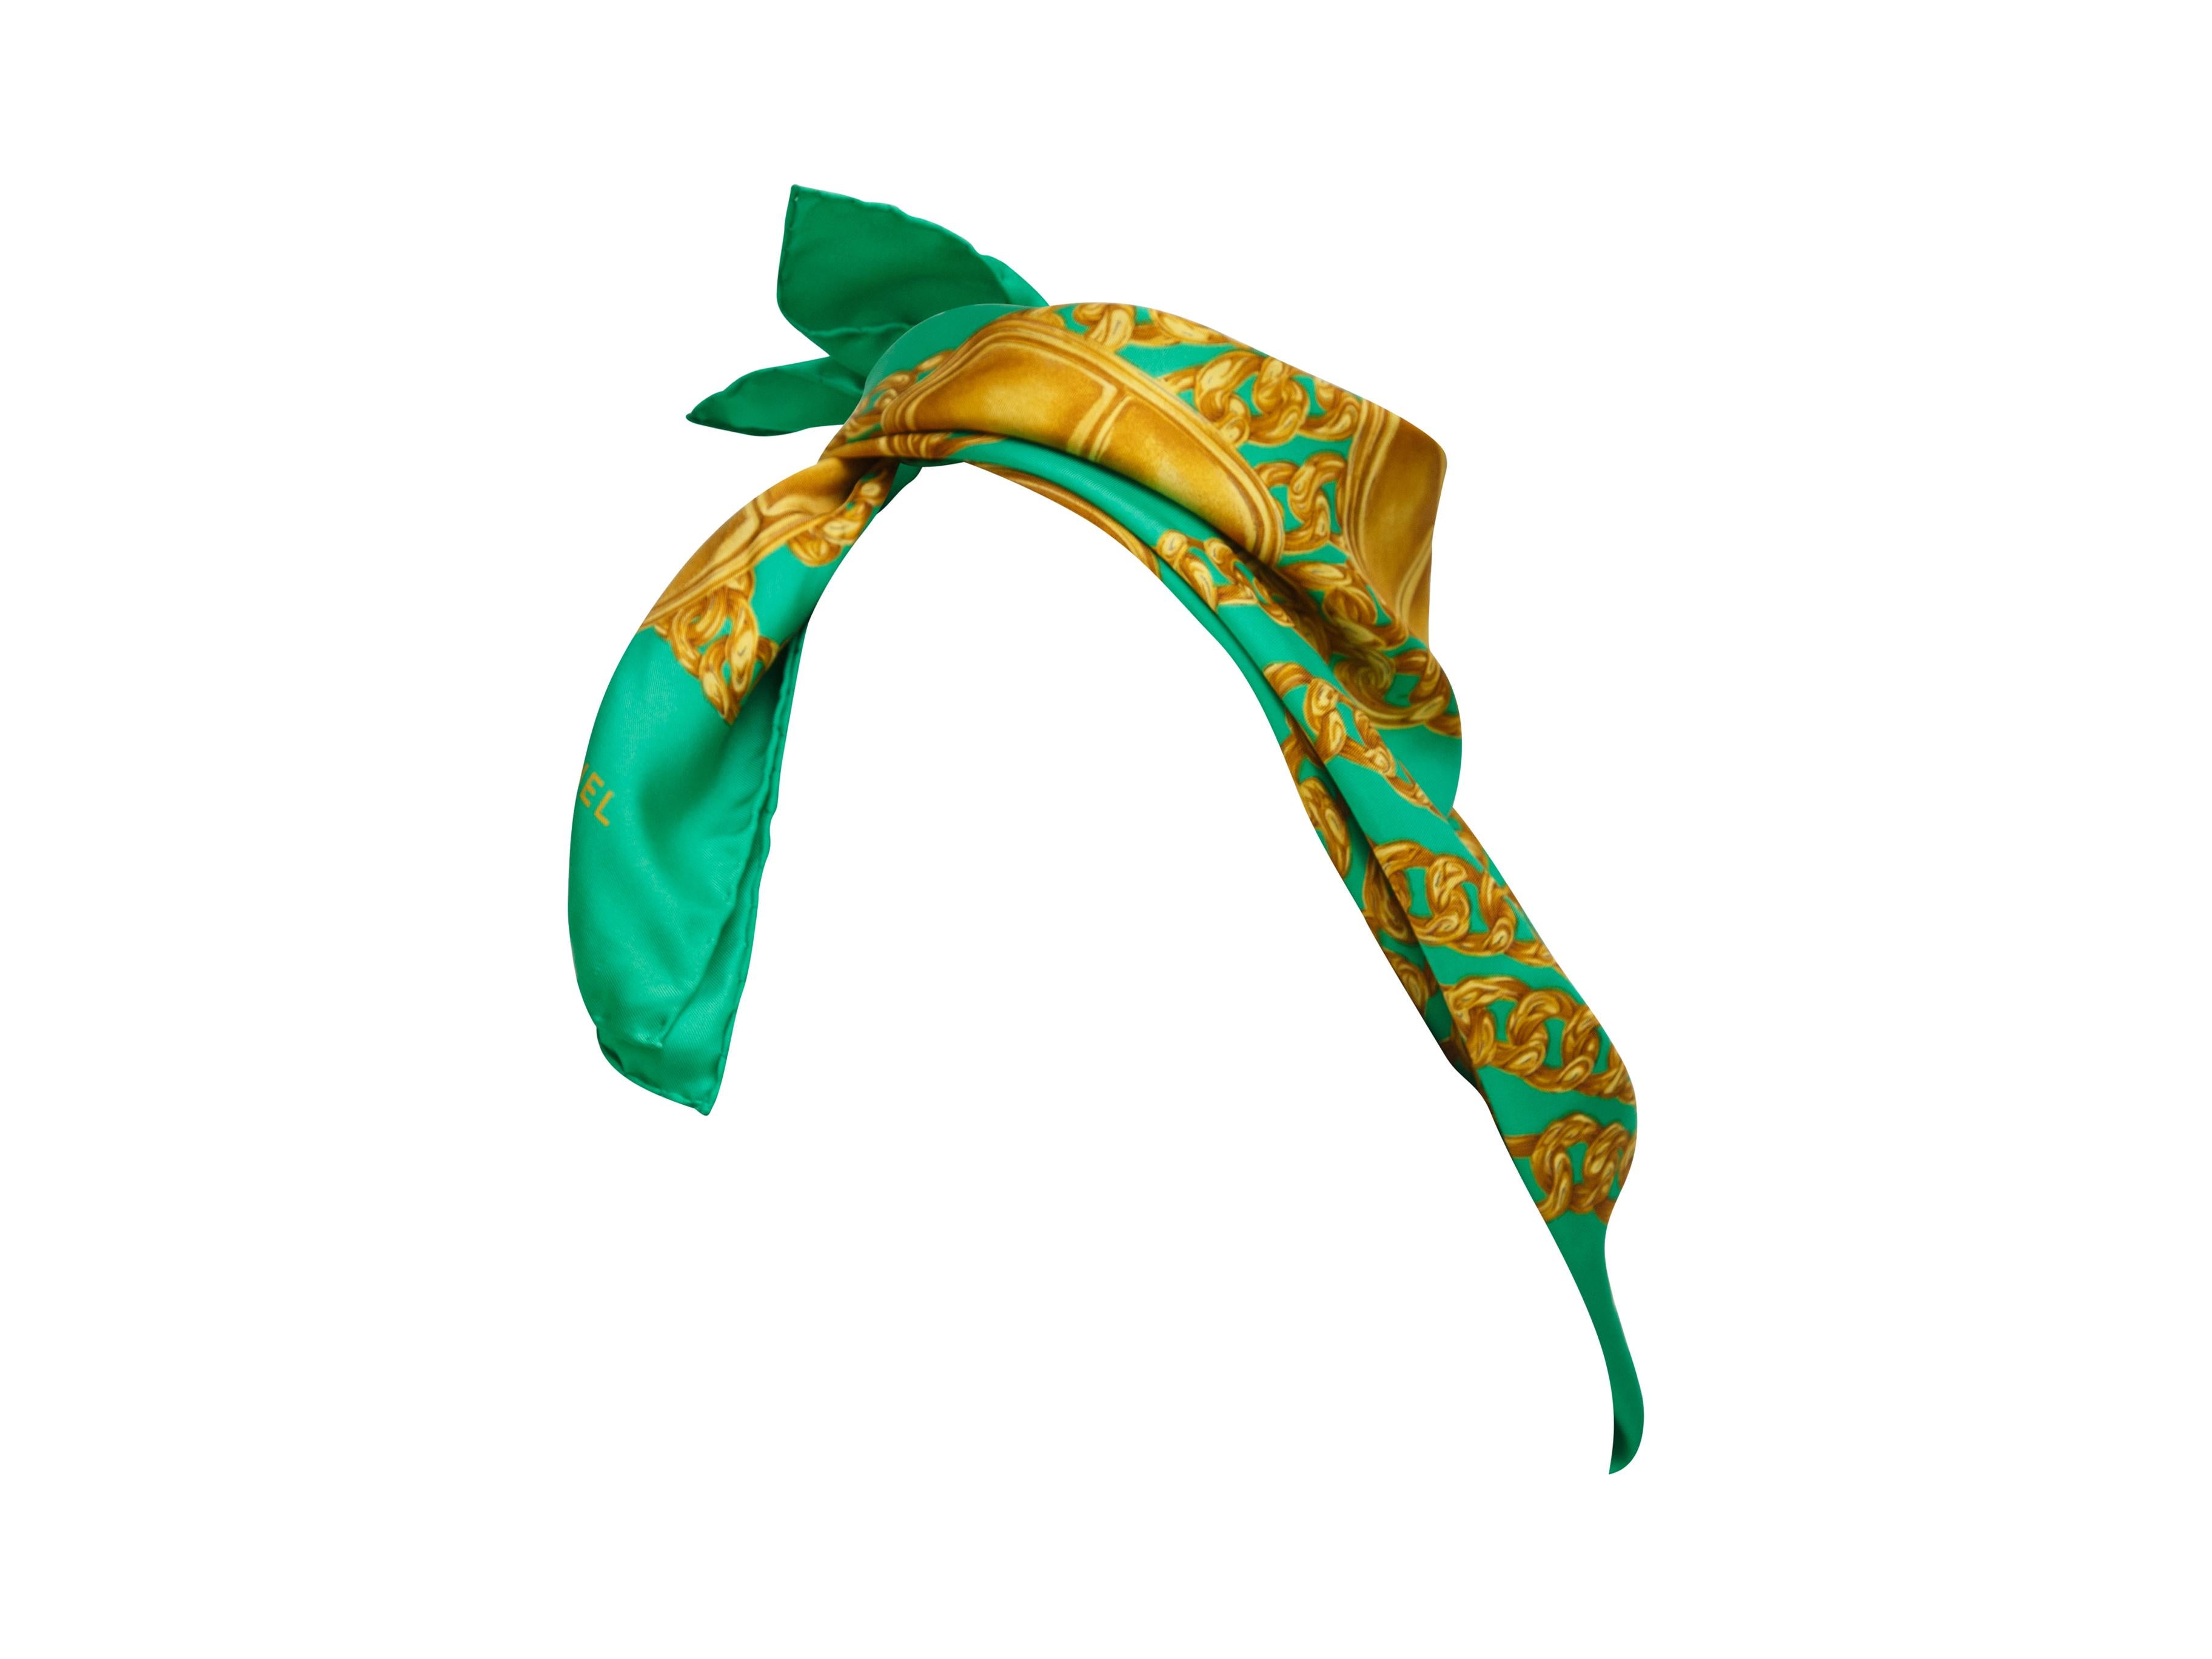 Product details: Vintage green and gold chainlink-printed silk scarf by Chanel.  35